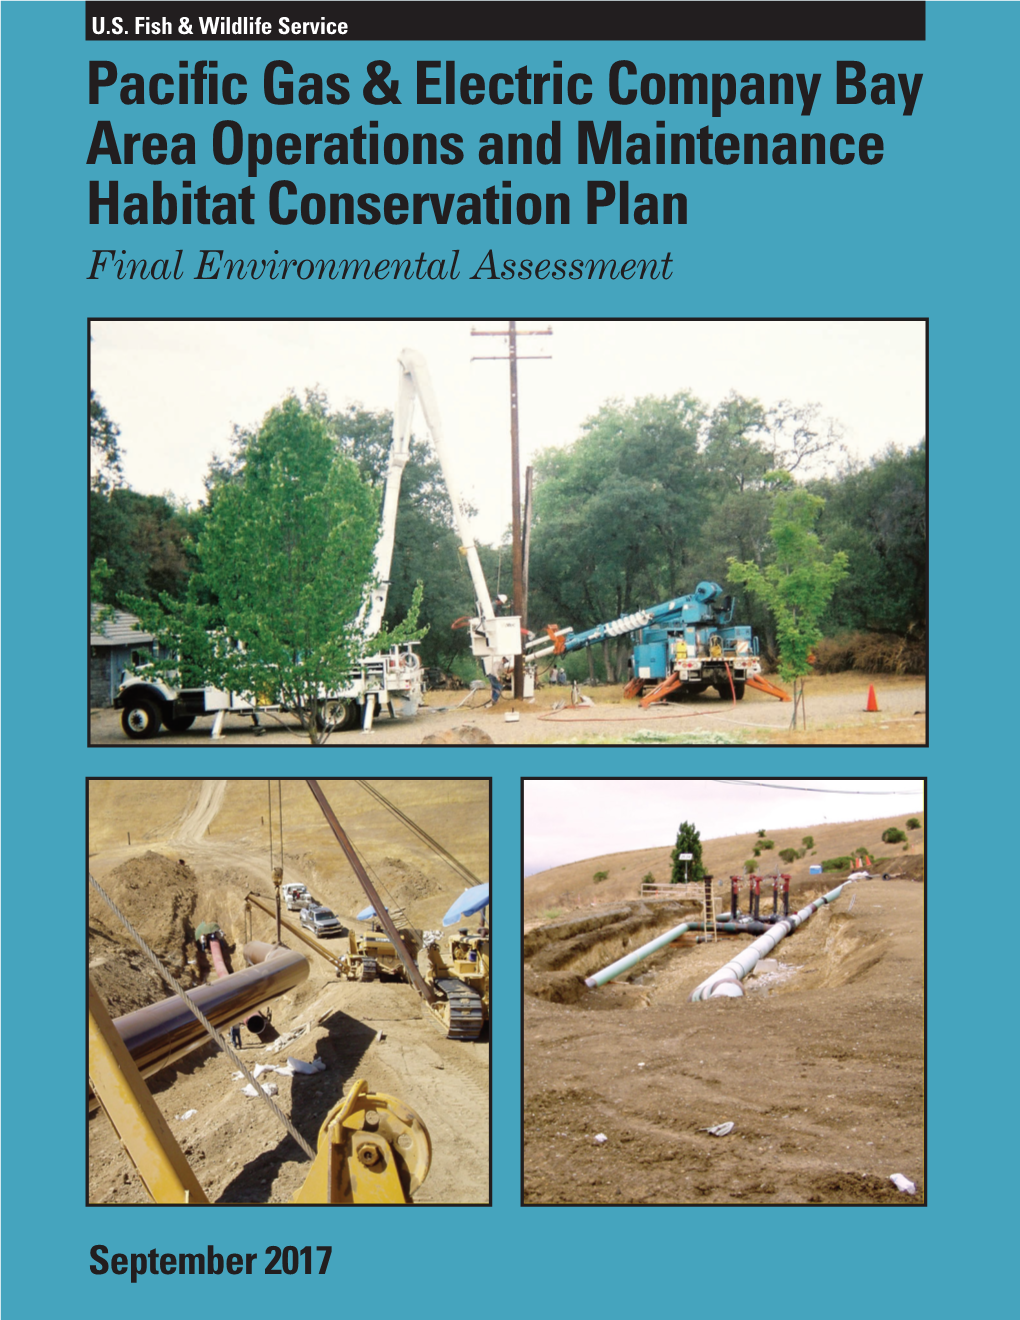 Pacific Gas & Electric Company Bay Area Operations and Maintenance Habitat Conservation Plan